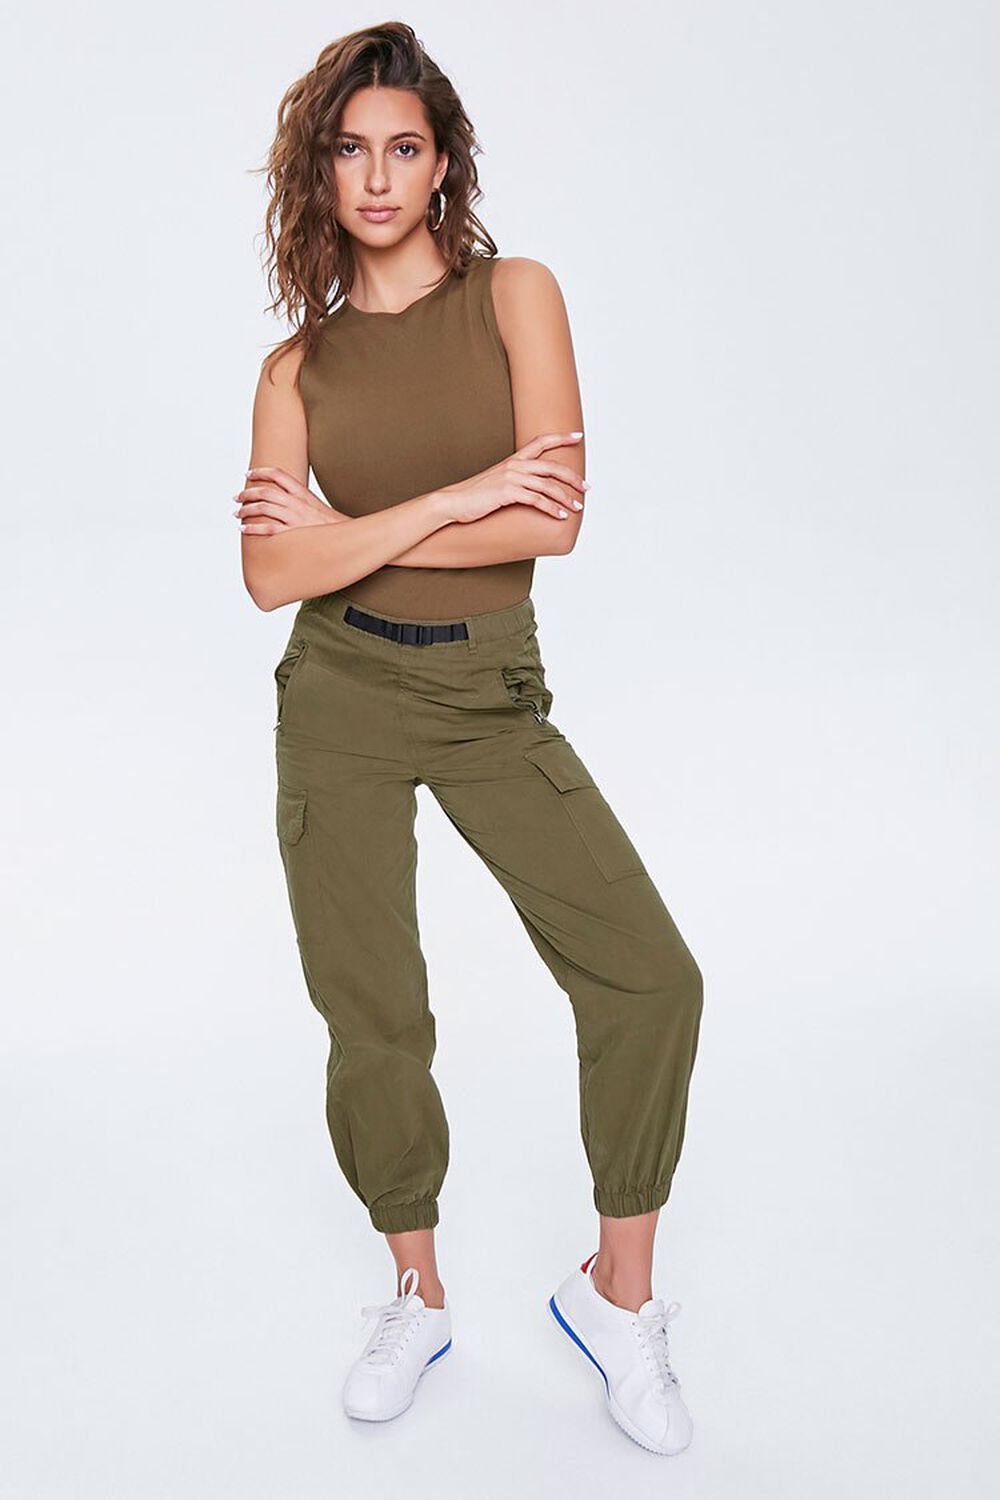 OLIVE Buckled Cargo Ankle Joggers, image 1